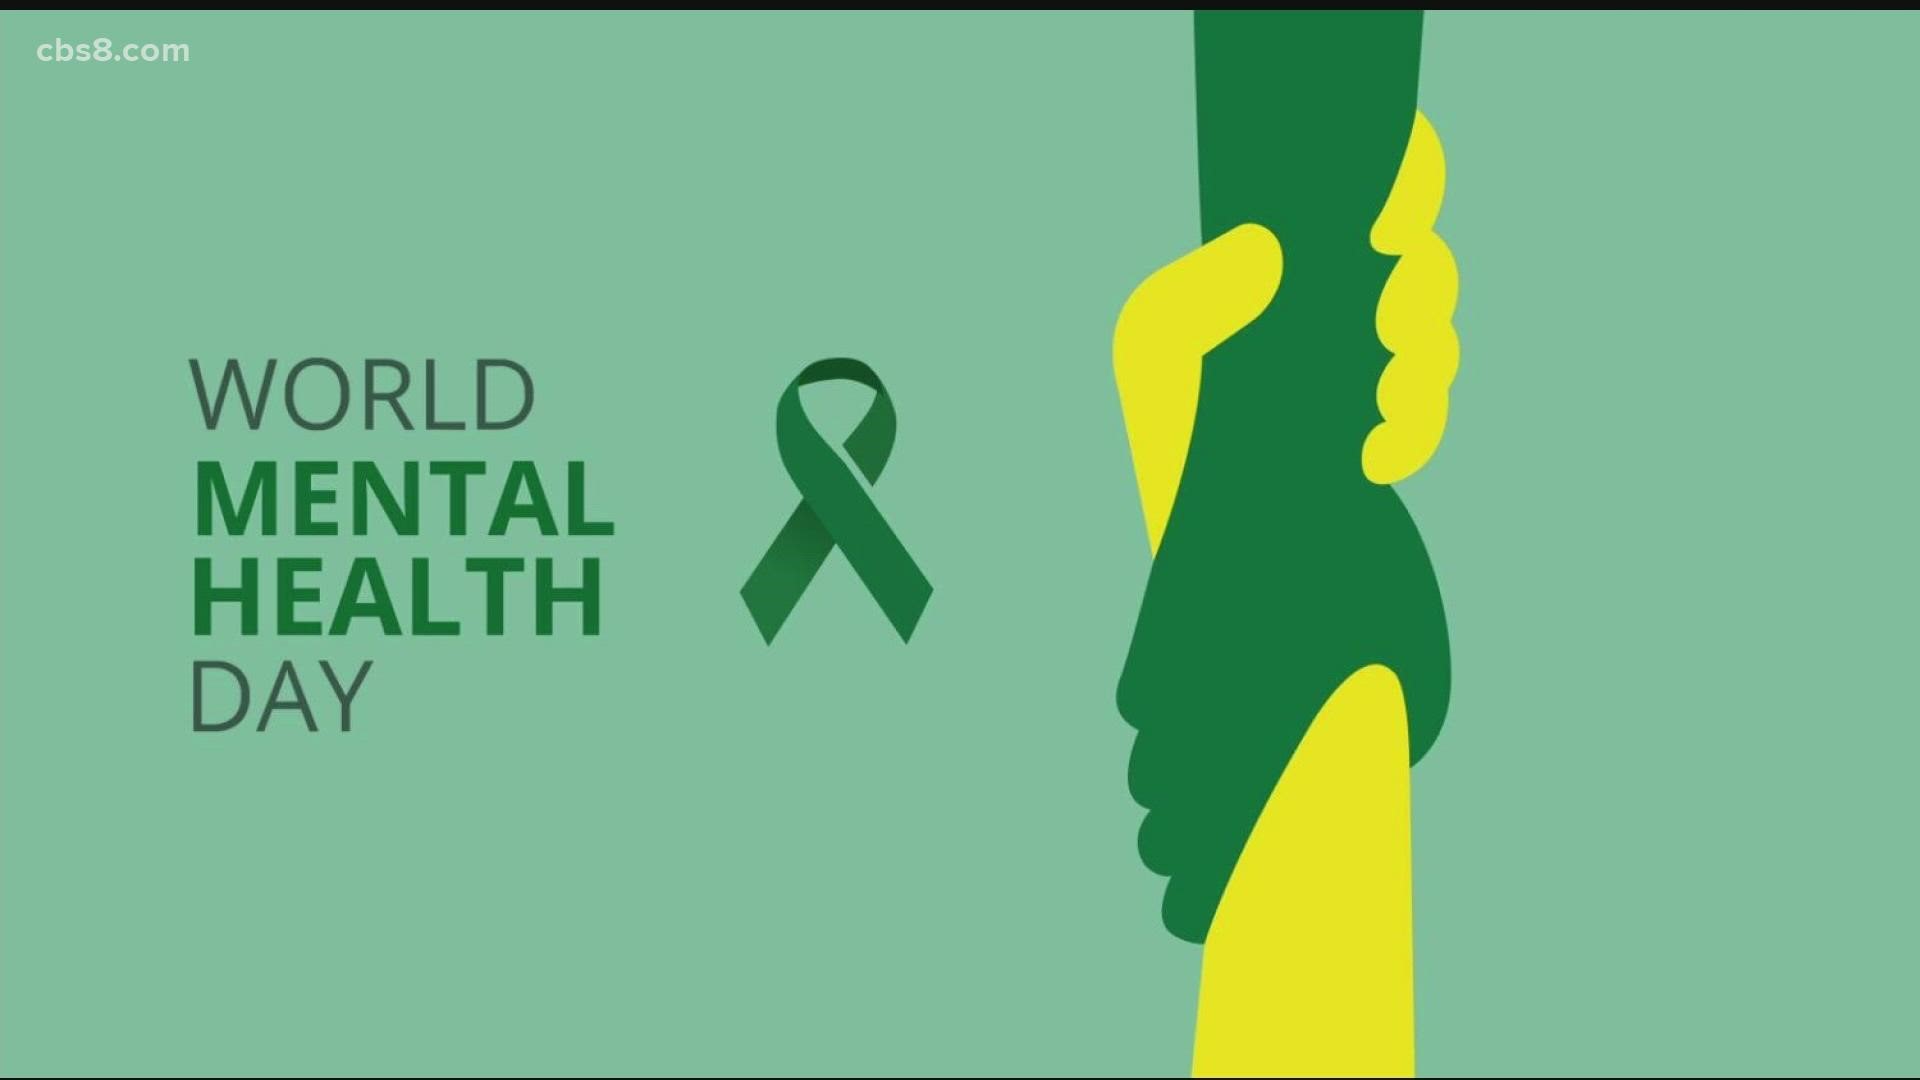 World Mental Health Day was Sunday, October 10 and it's also Emotional Wellness Month.